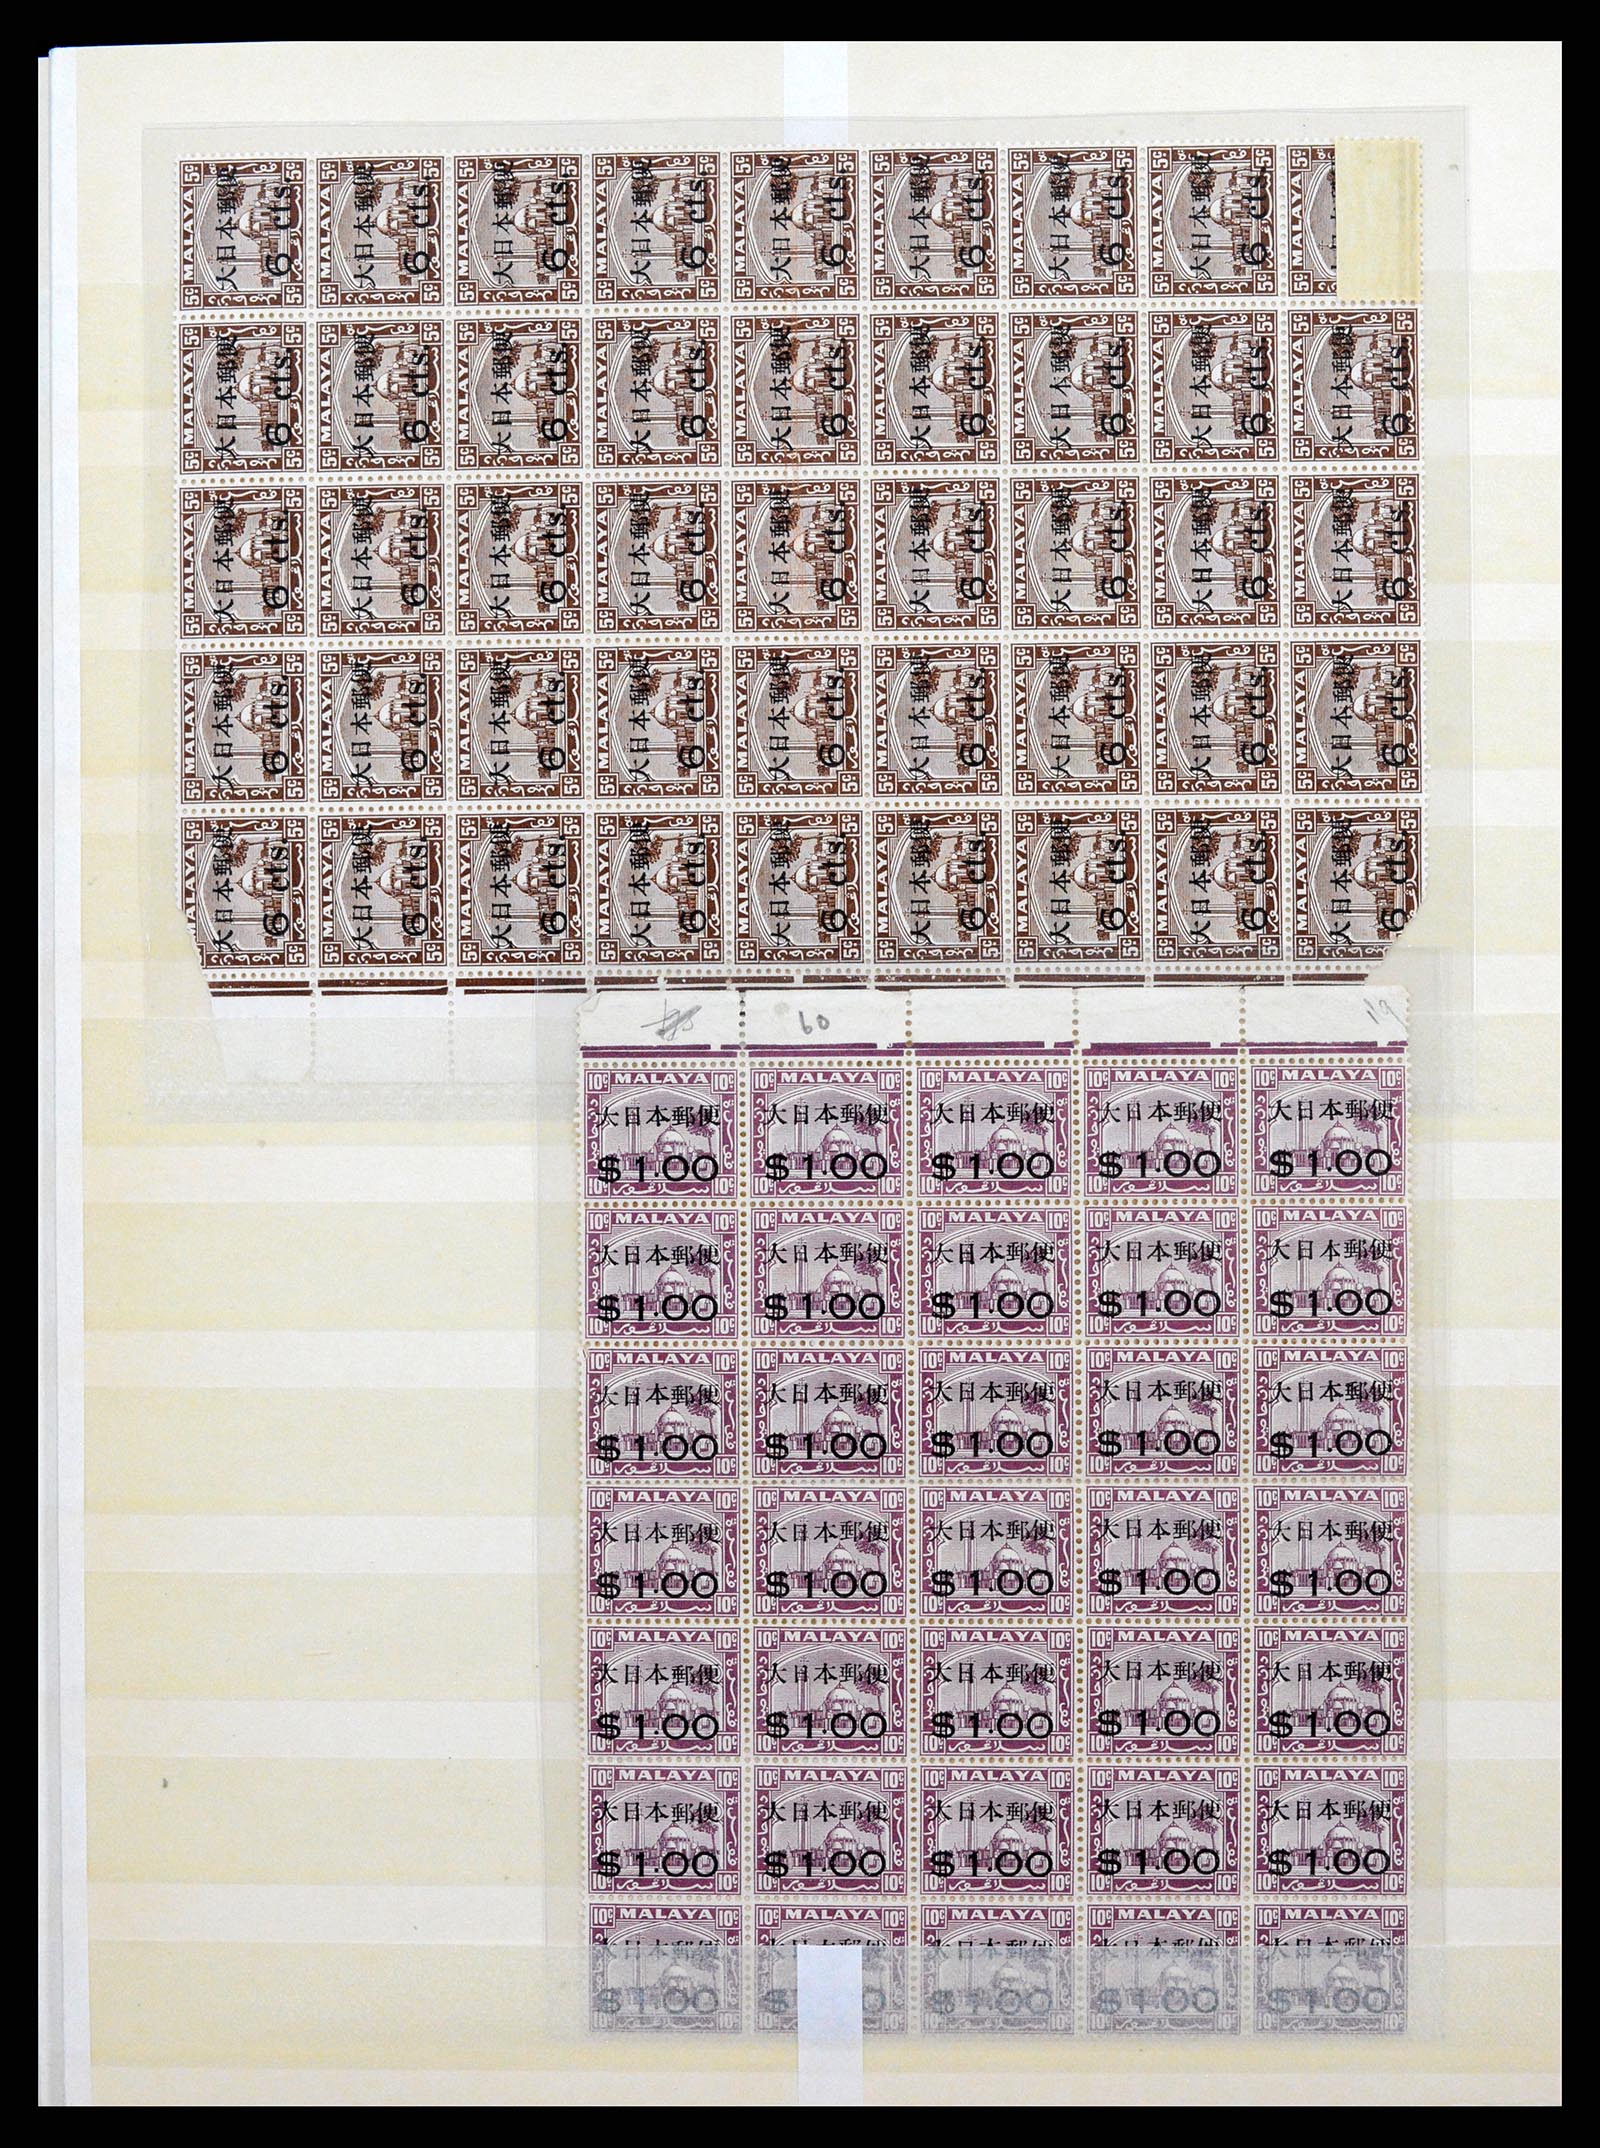 37429 040 - Stamp collection 37429 Japanese occupation Dutch East Indies 1942-1945.